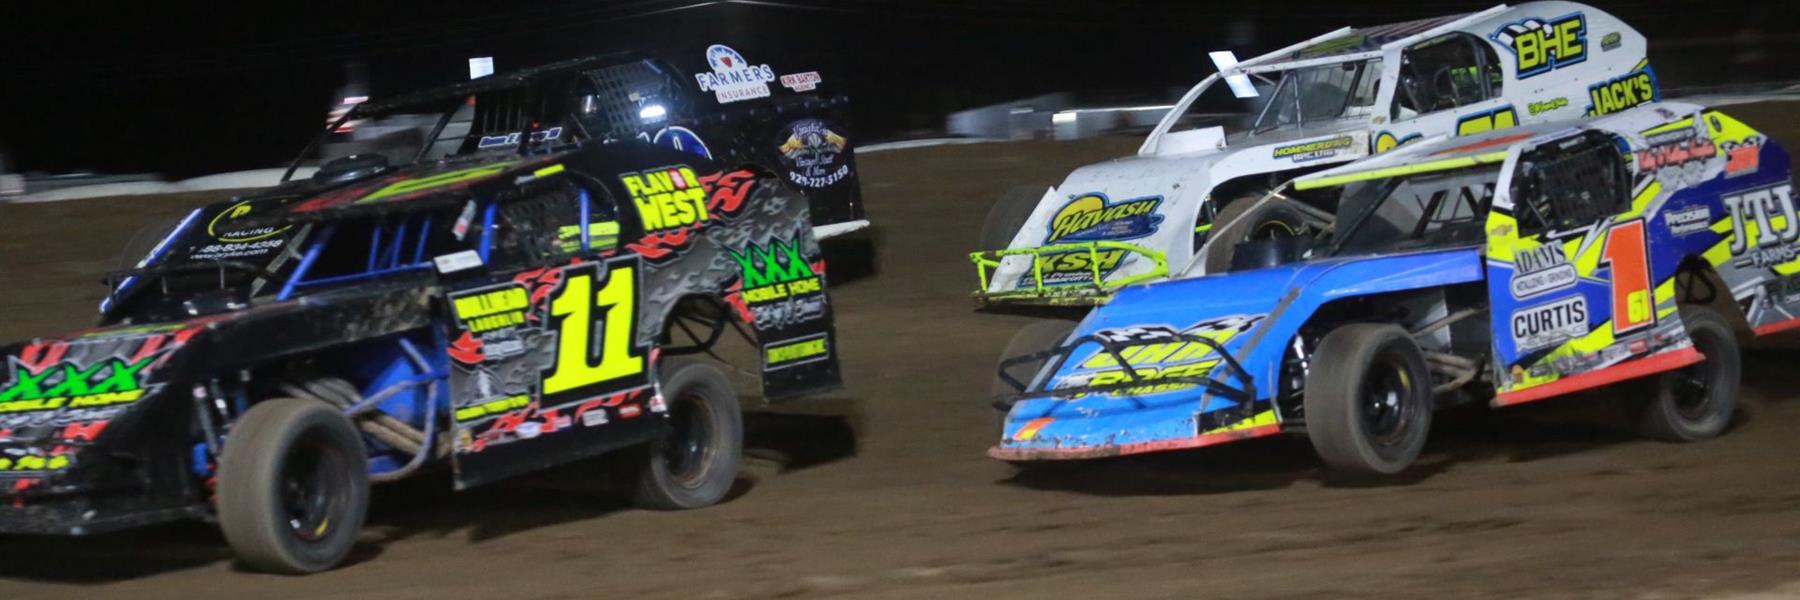 3/10/2023 - Mohave Valley Raceway